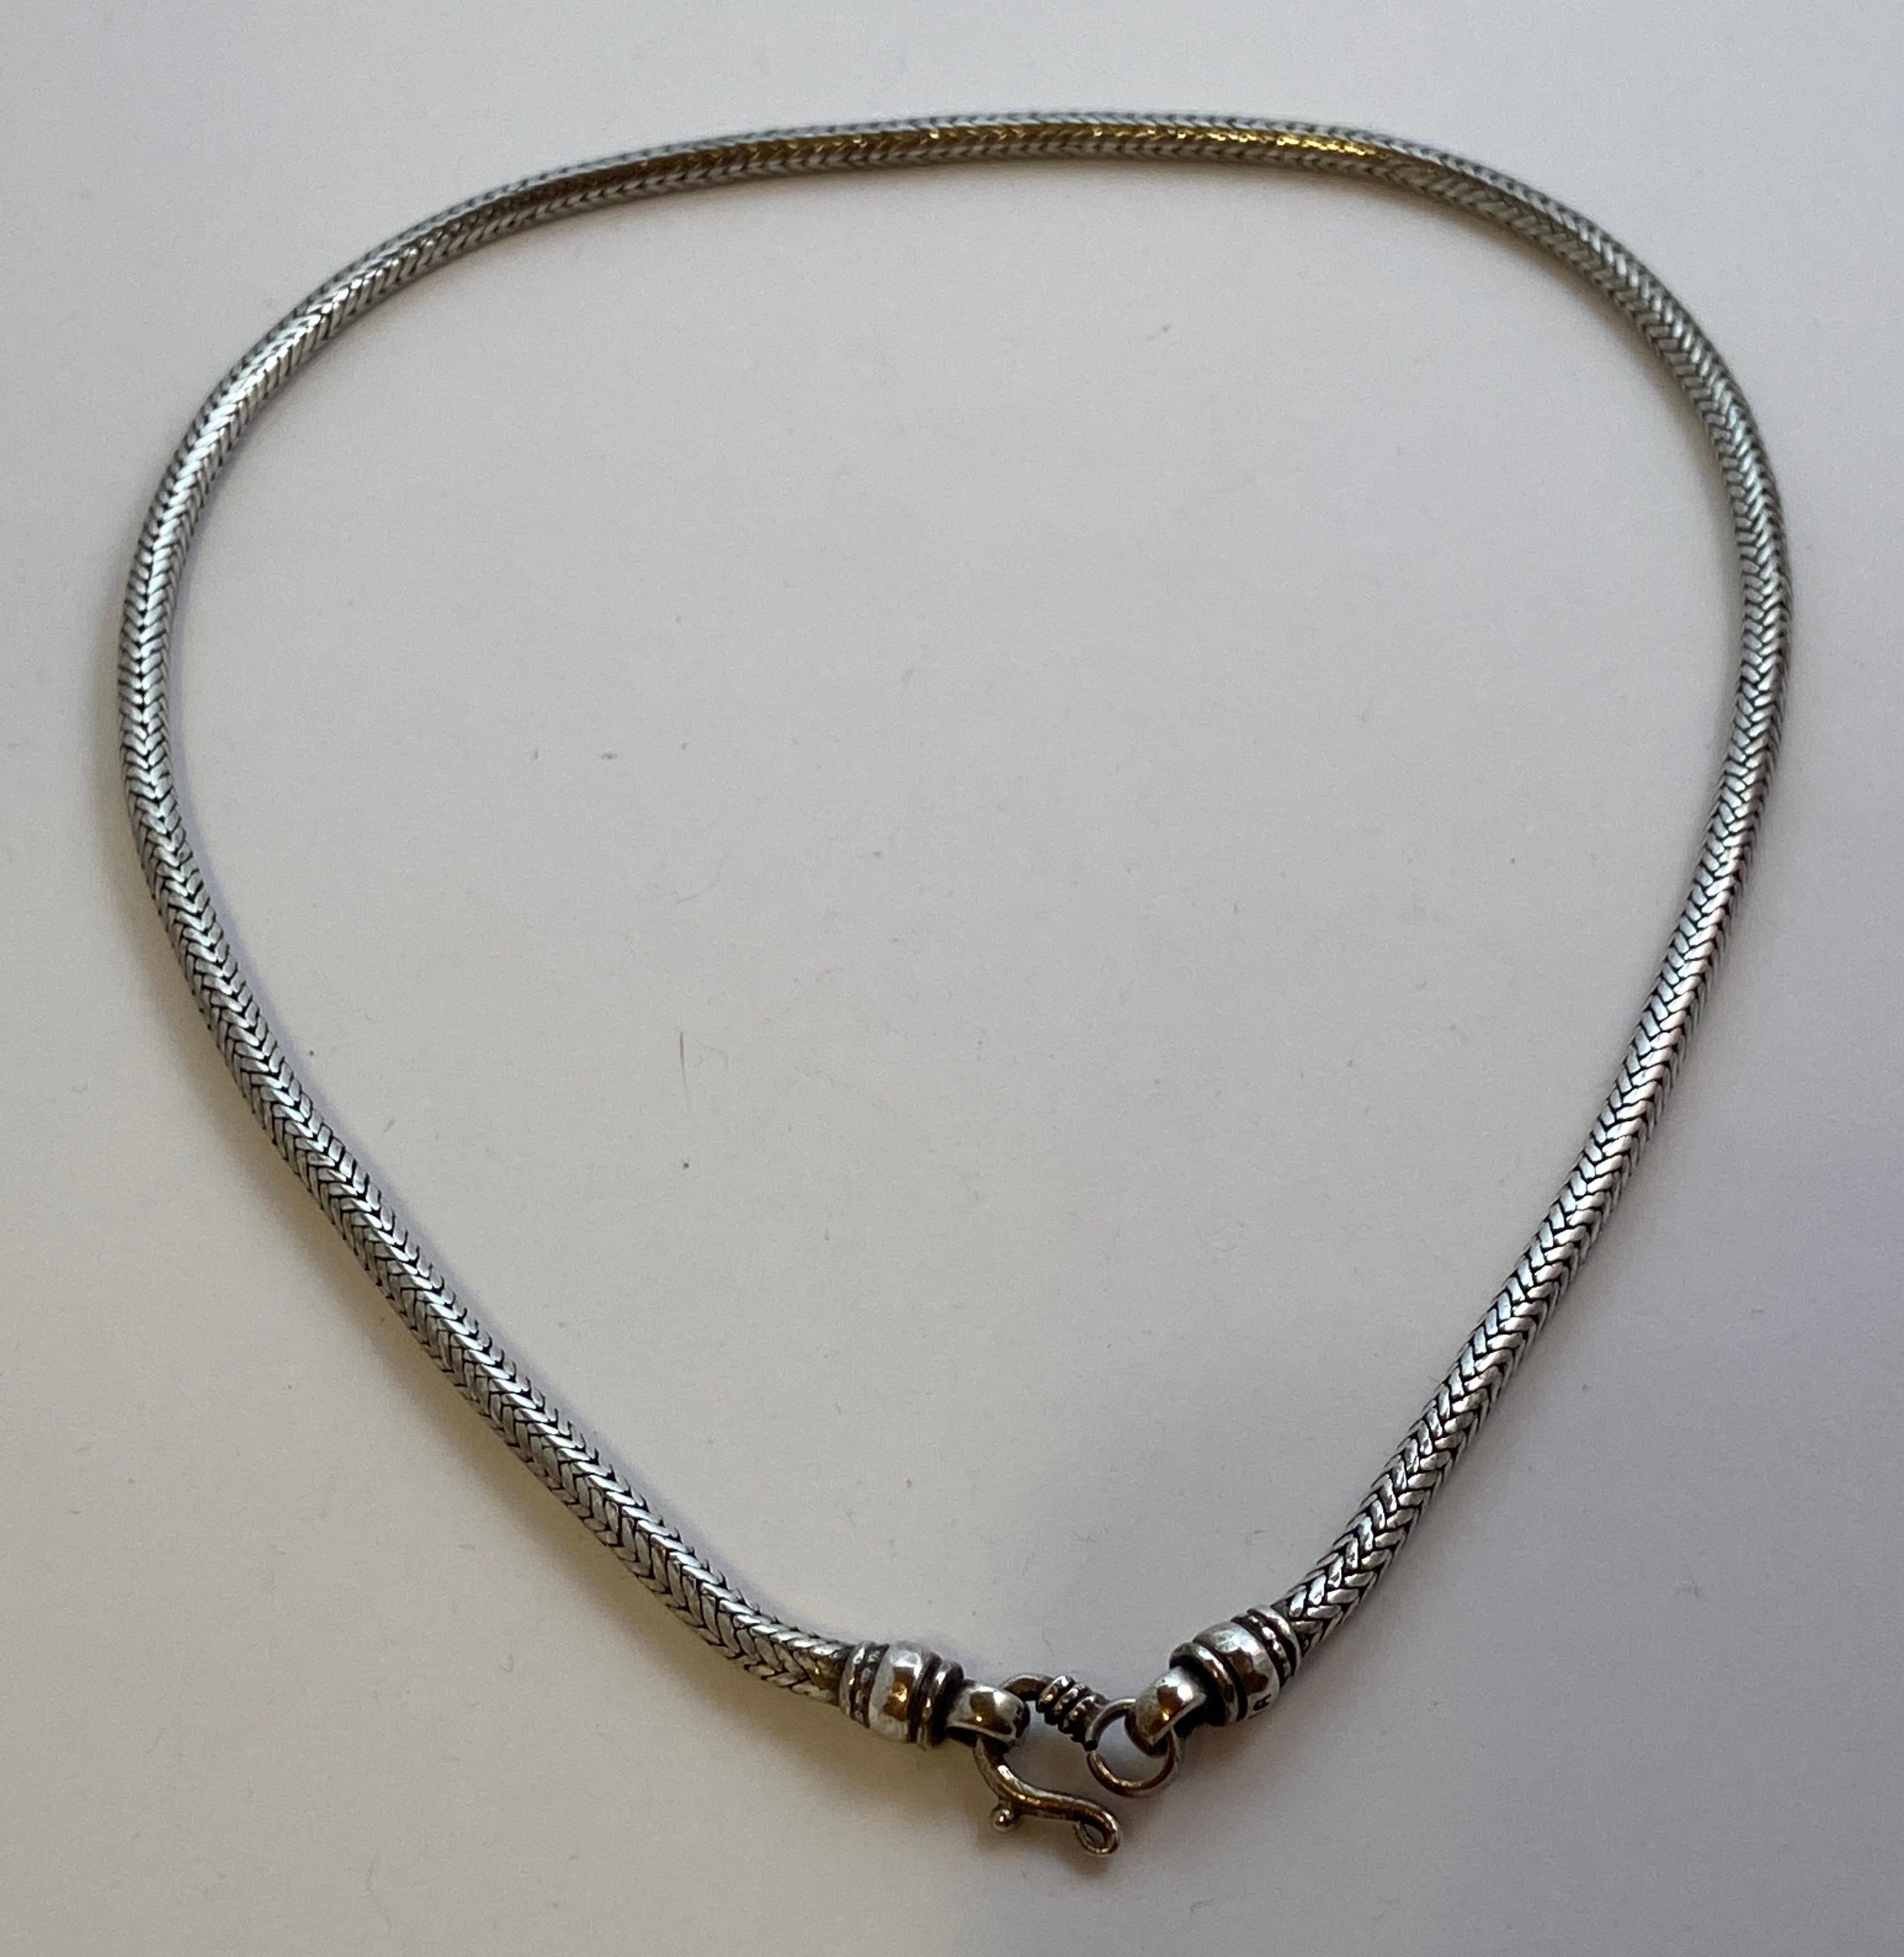 Heavily smooth snake-link sterling silver necklace has the maker's mark: RA 
Total length measures 18 2/8 inches, circumference measures 2/8 of a inch. Made in US